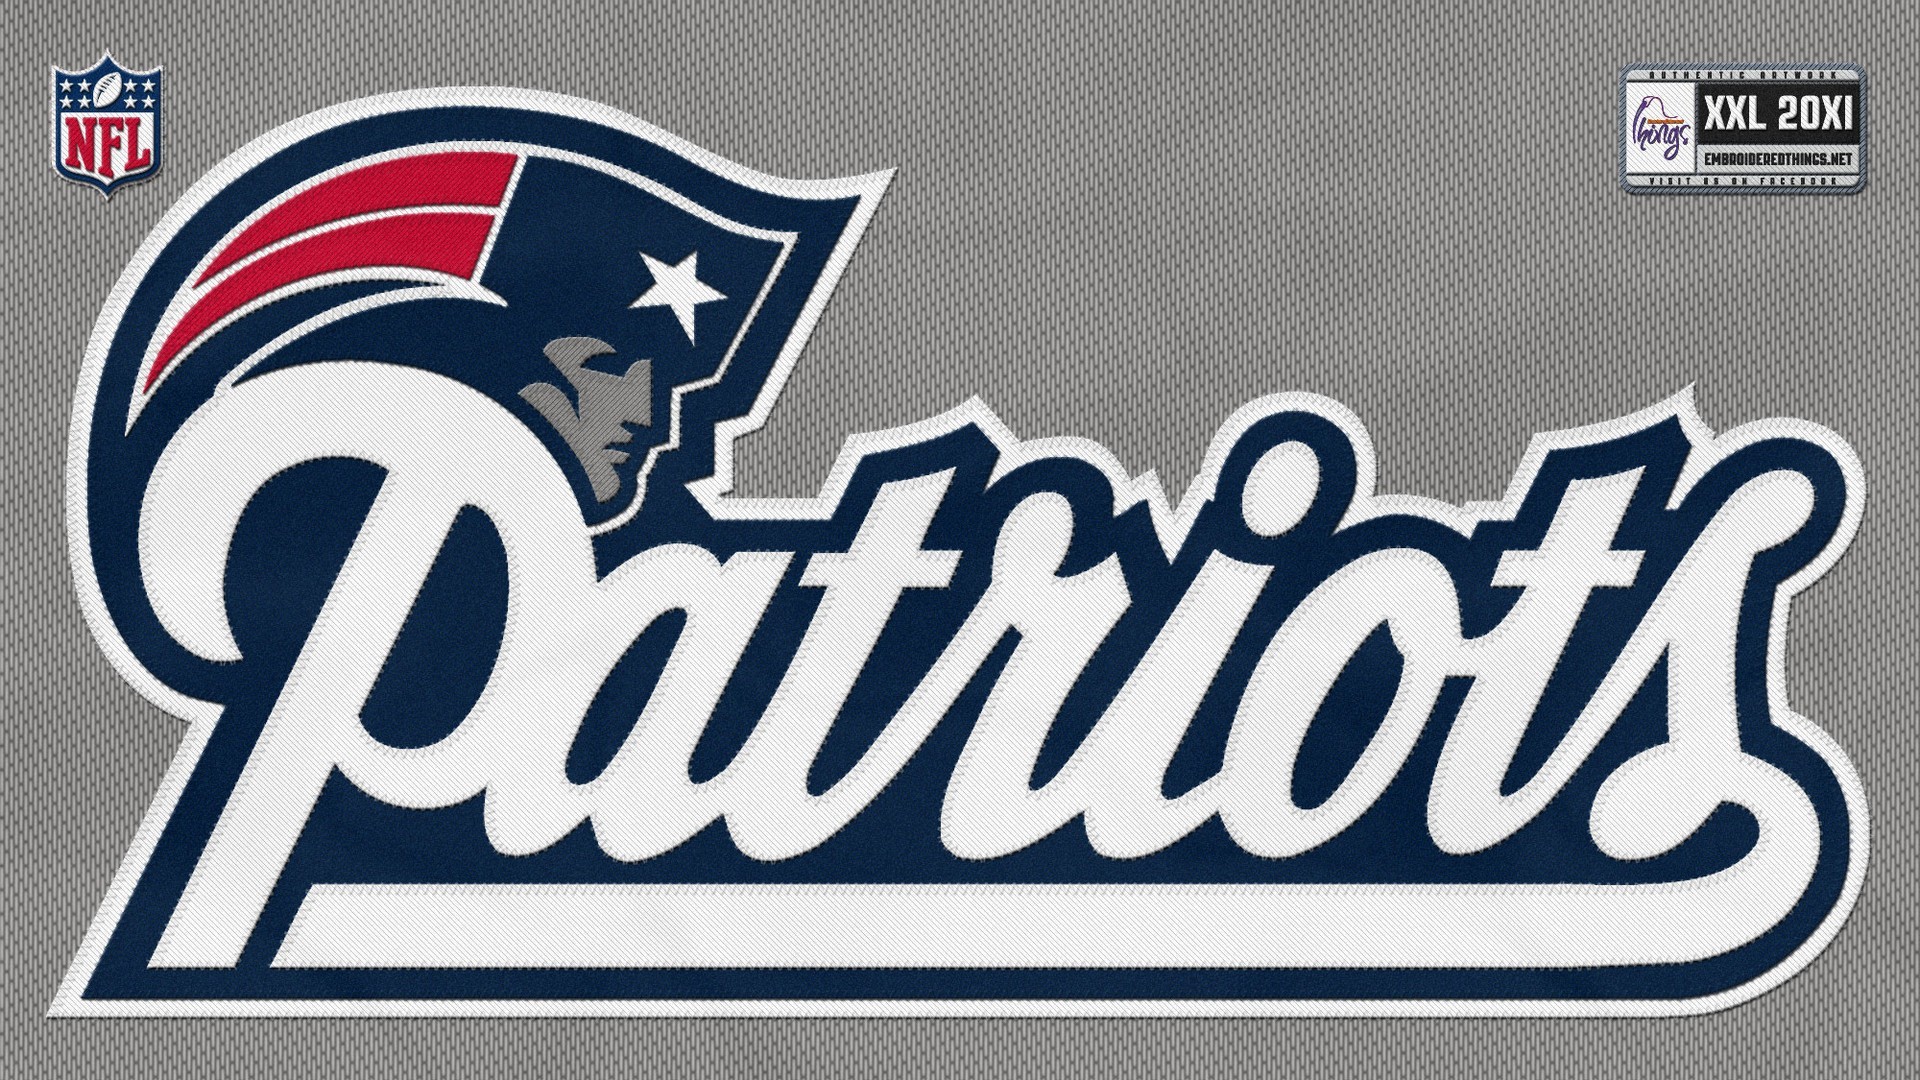 HD Desktop Wallpaper New England Patriots NFL With high-resolution 1920X1080 pixel. You can use this wallpaper for your Mac or Windows Desktop Background, iPhone, Android or Tablet and another Smartphone device